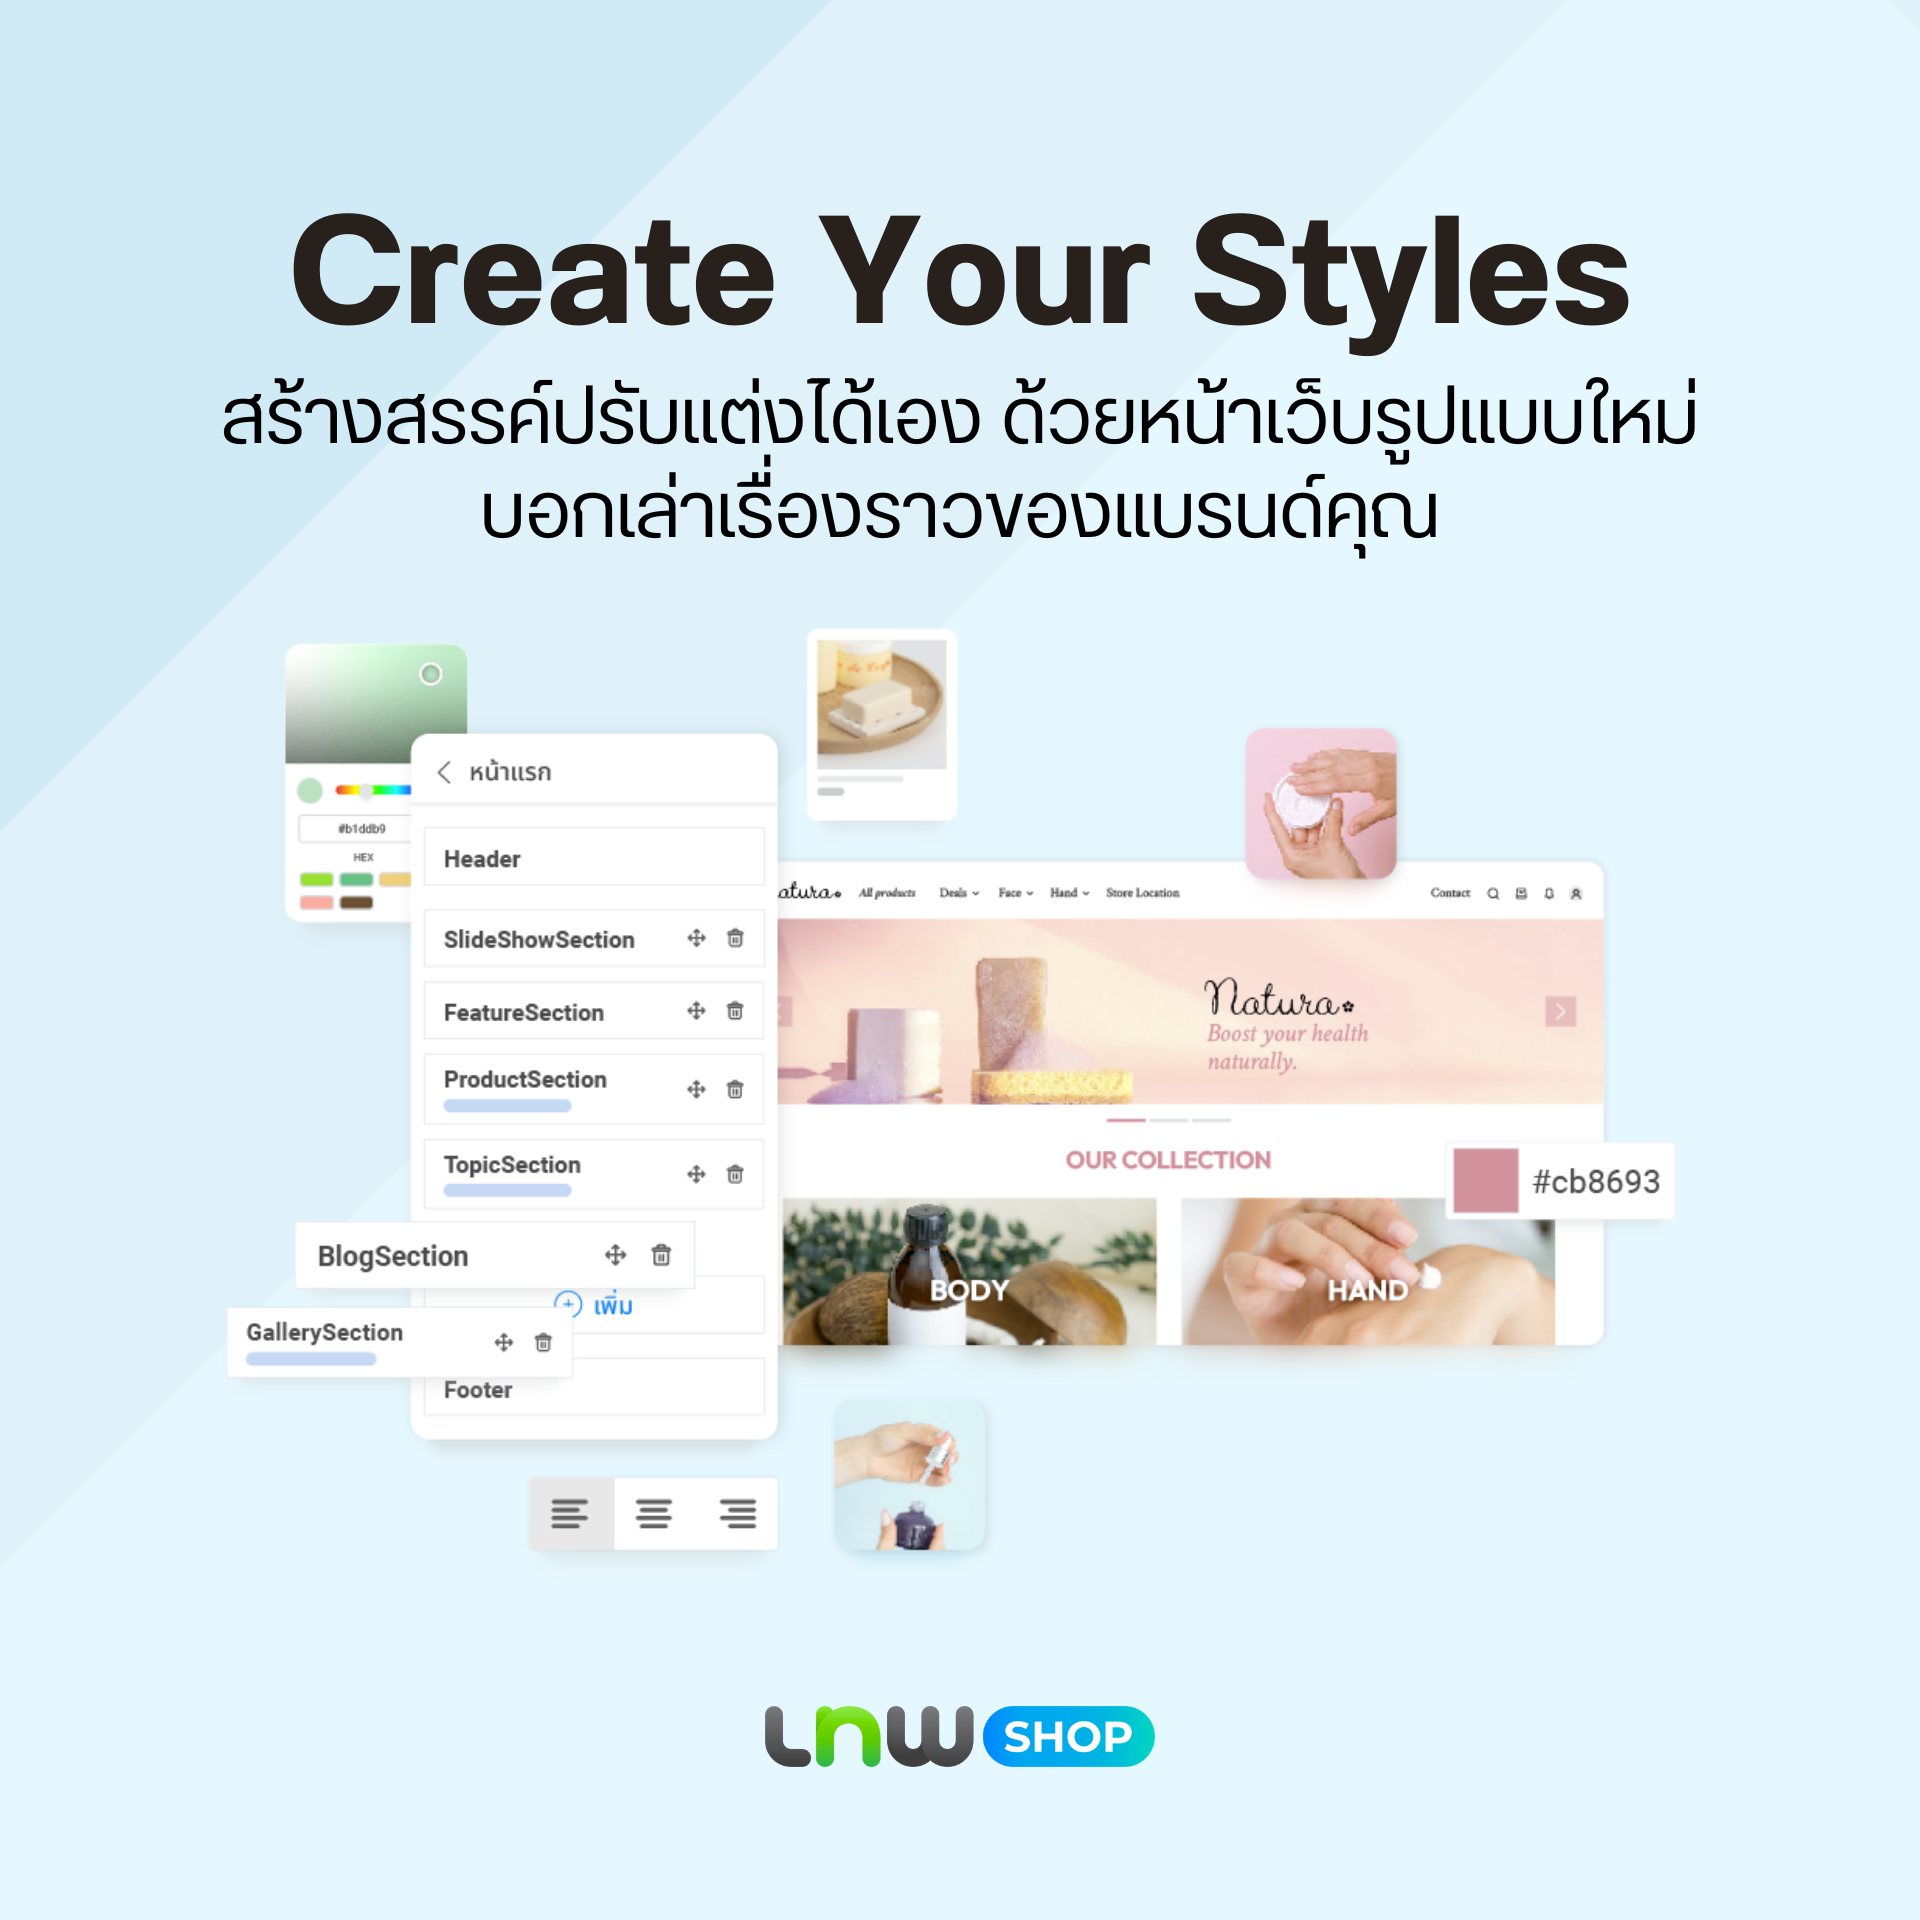 LnwShop WebStore - Create Your Styles